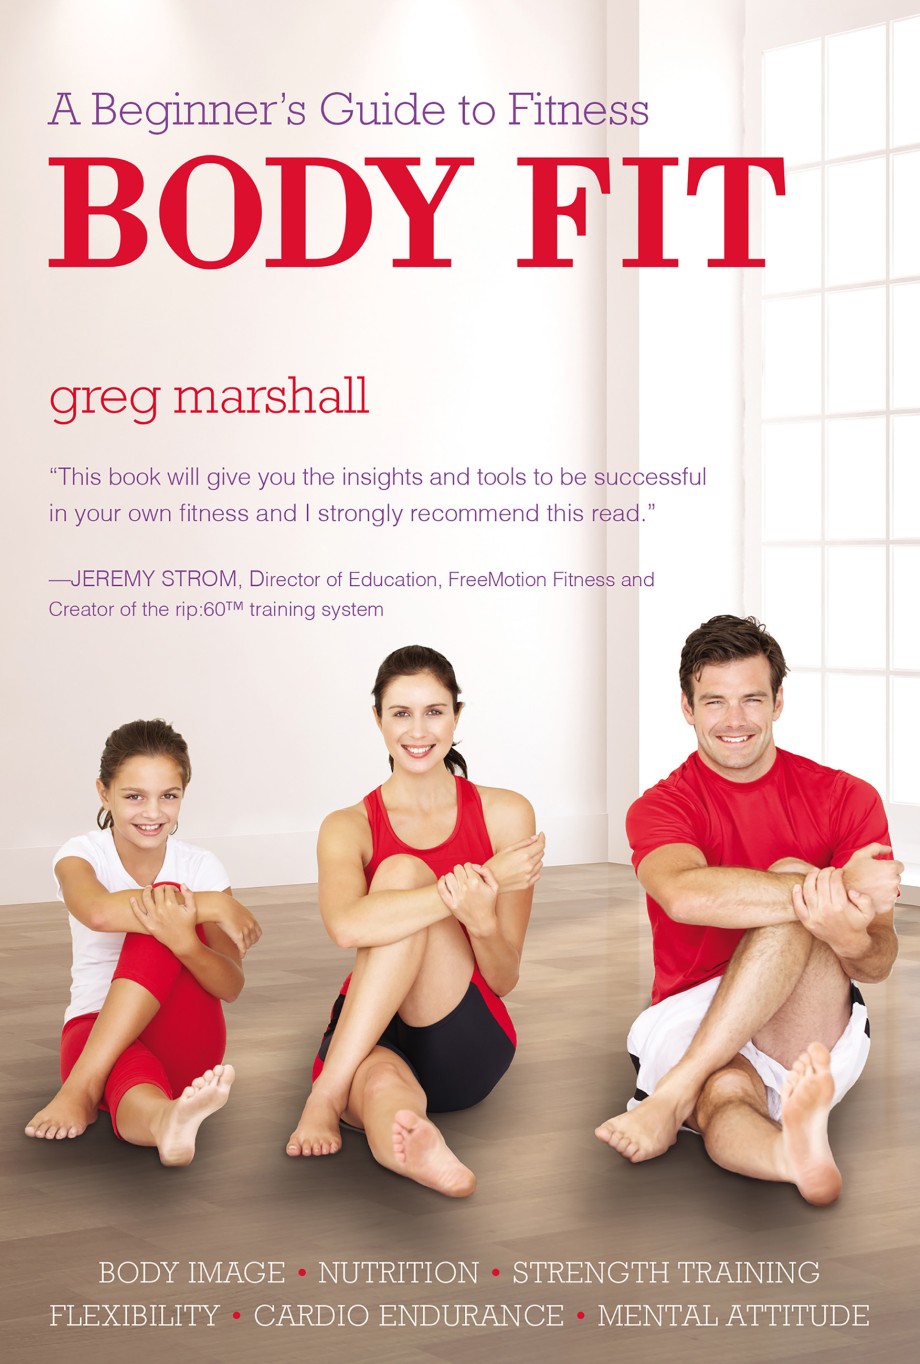 Body Fit A Beginner's Guide to Fitness